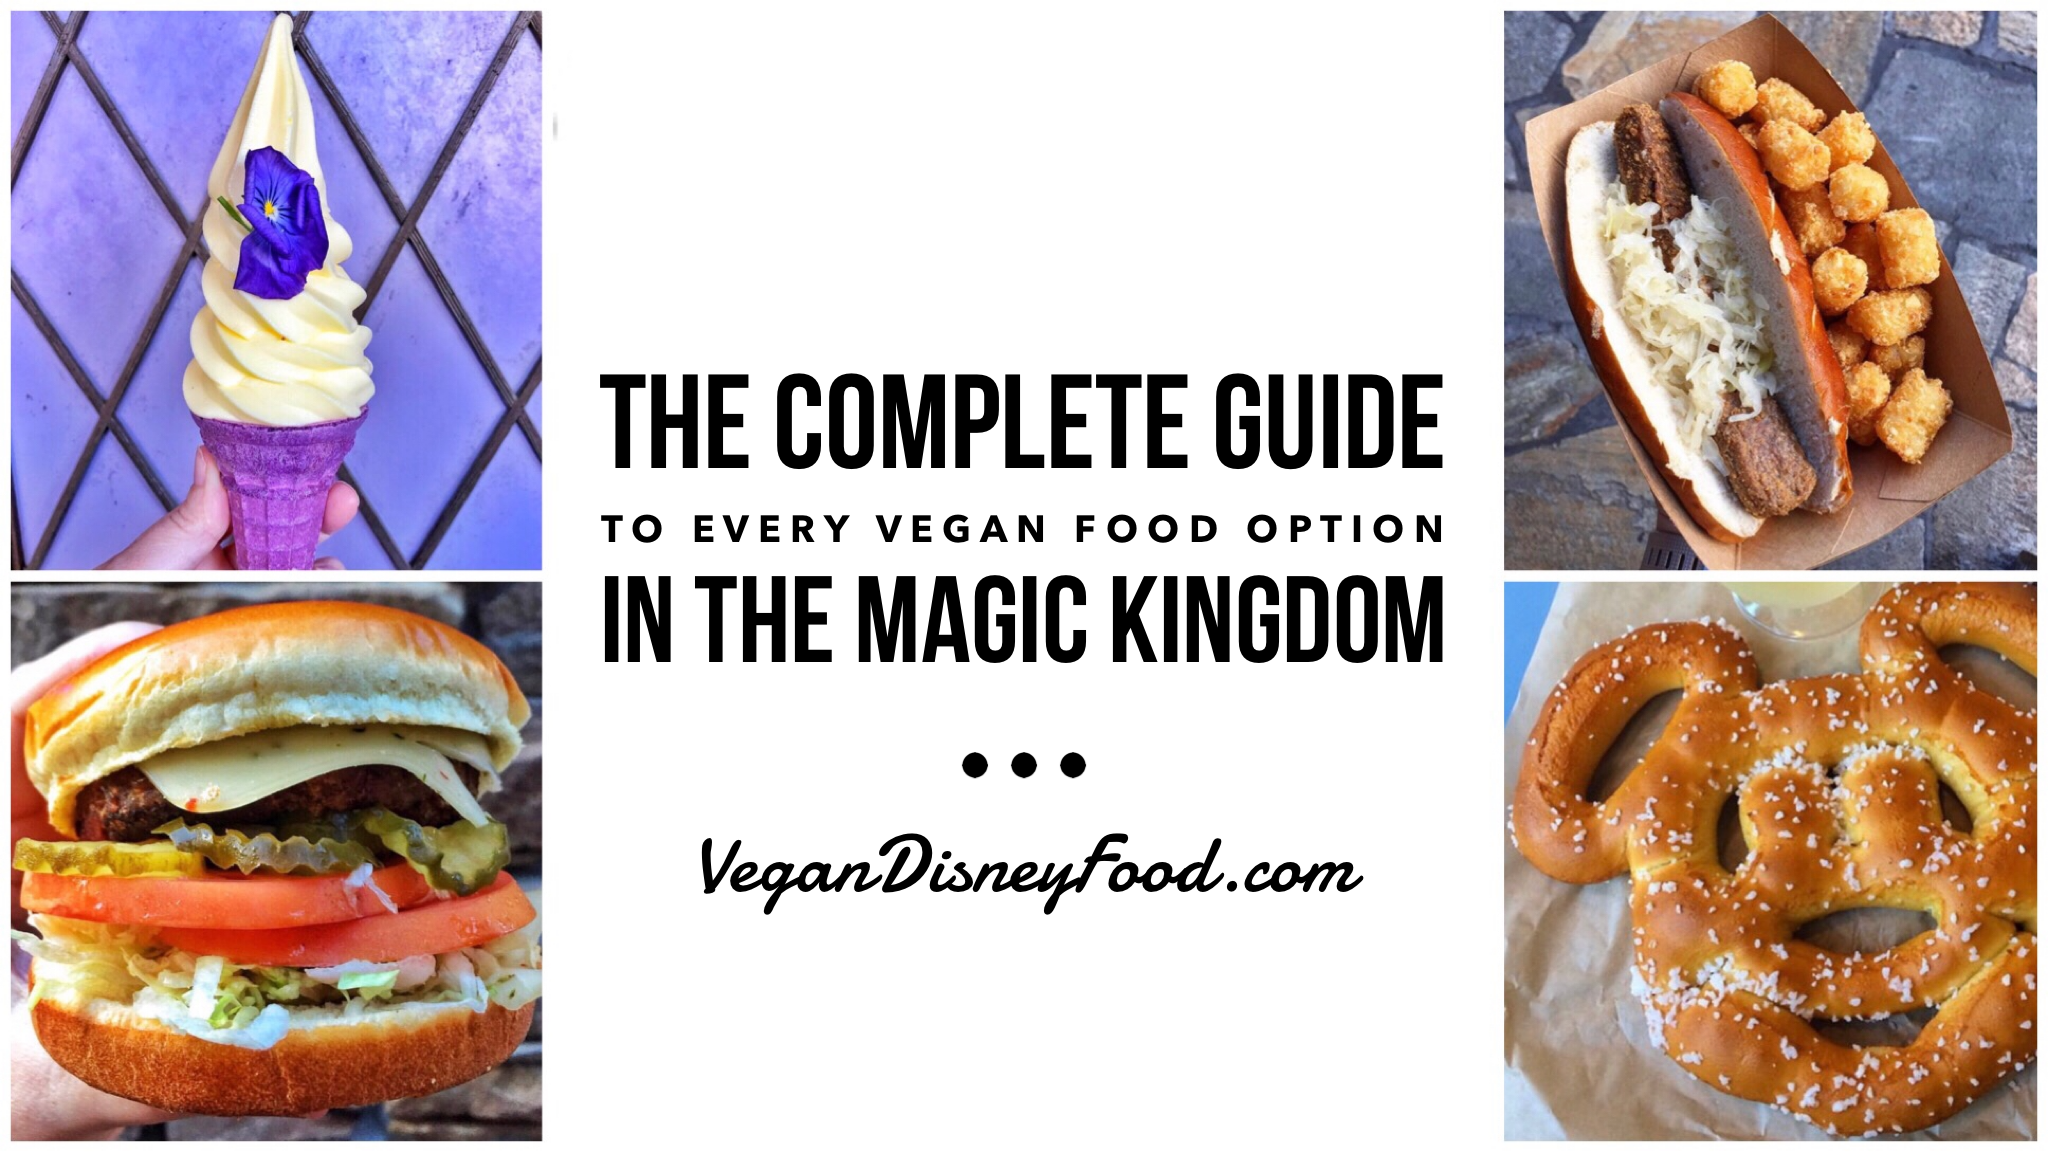 What’s Vegan in the Magic Kingdom? - The Complete Guide to Every Vegan Food Option in the Magic Kingdom at Walt Disney World